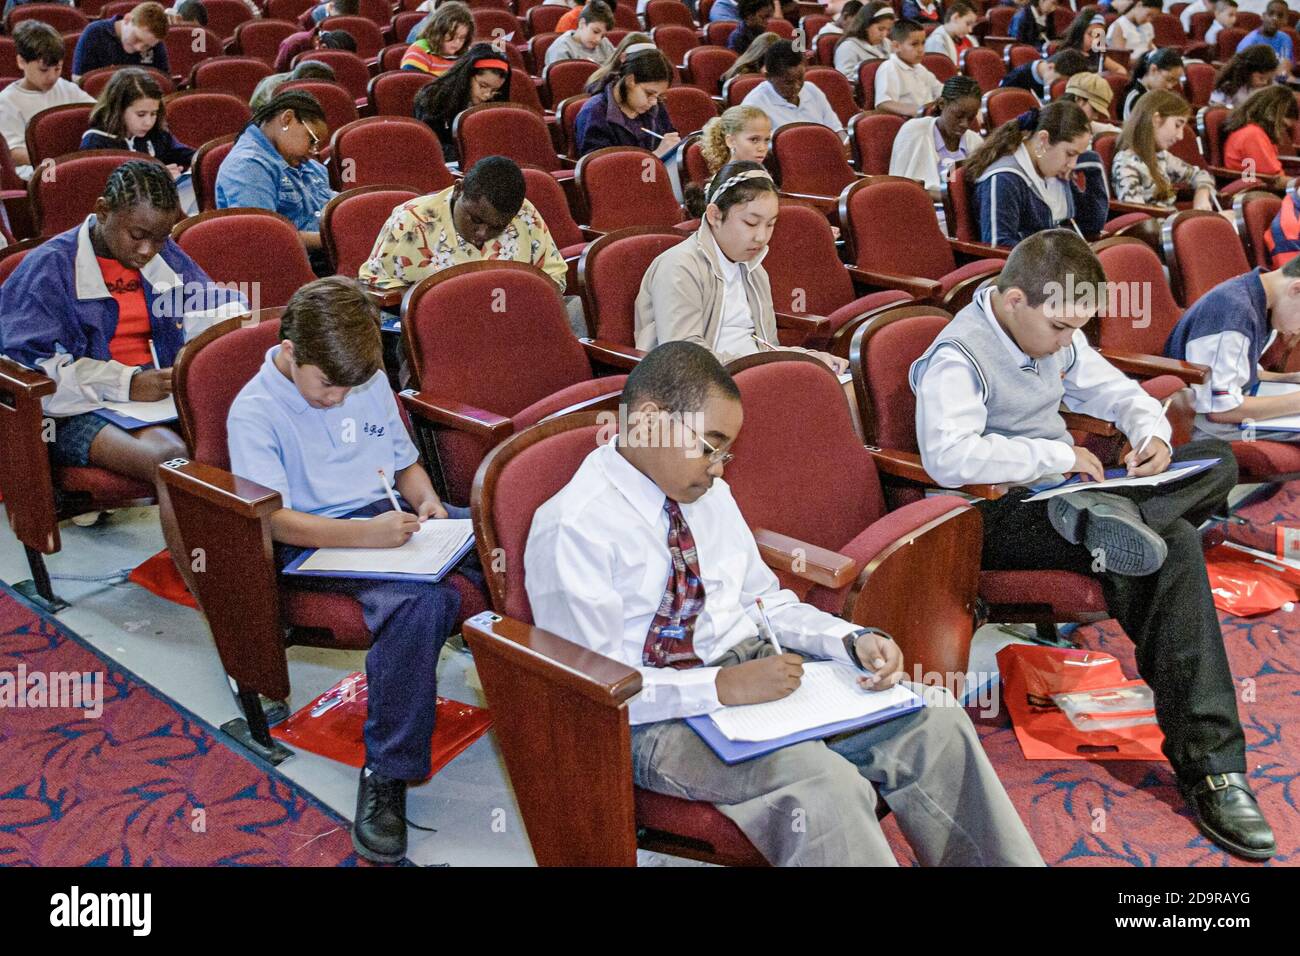 Miami Florida,Dade Monroe County Spelling Bee,annual event competition student students taking test exam examination,seat separation seated separately Stock Photo